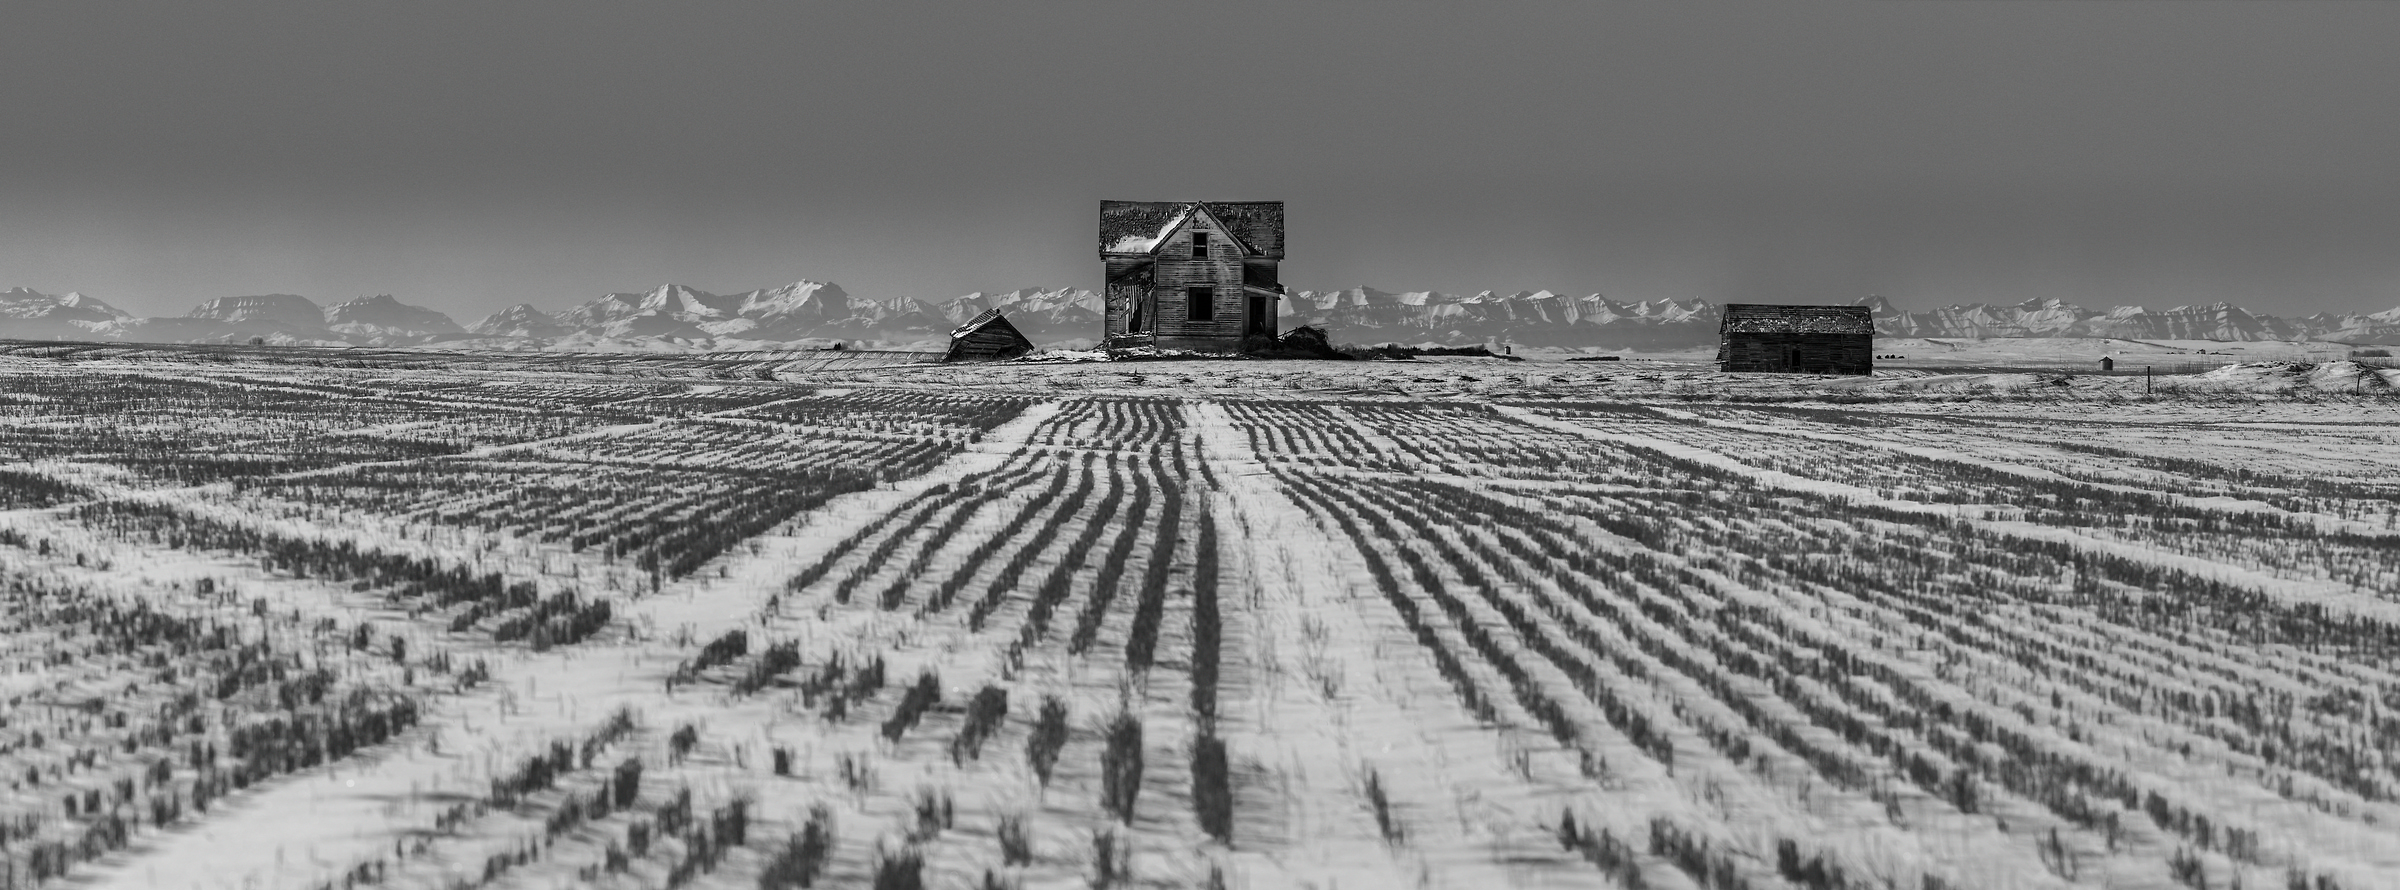 1,052 megapixels! A very high resolution, large-format VAST photo print of snow on a prairie with an abandoned house; black & white photograph created by Scott Dimond in Foothills County, Alberta, Canada.